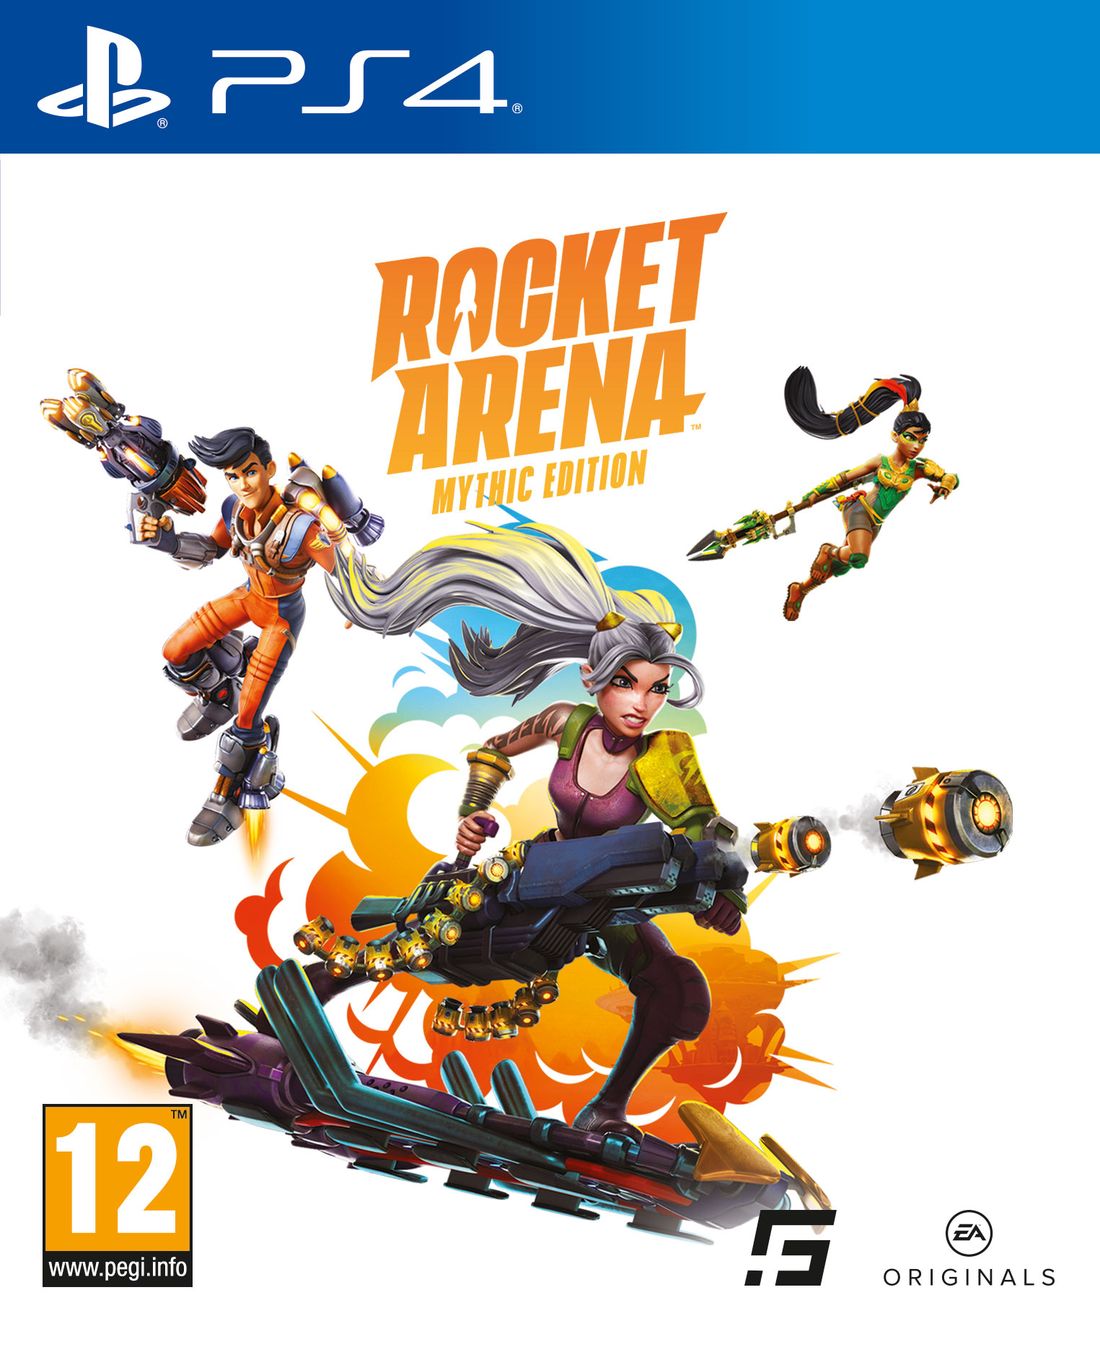 PS4 Rocket Arena Mythic Edition 